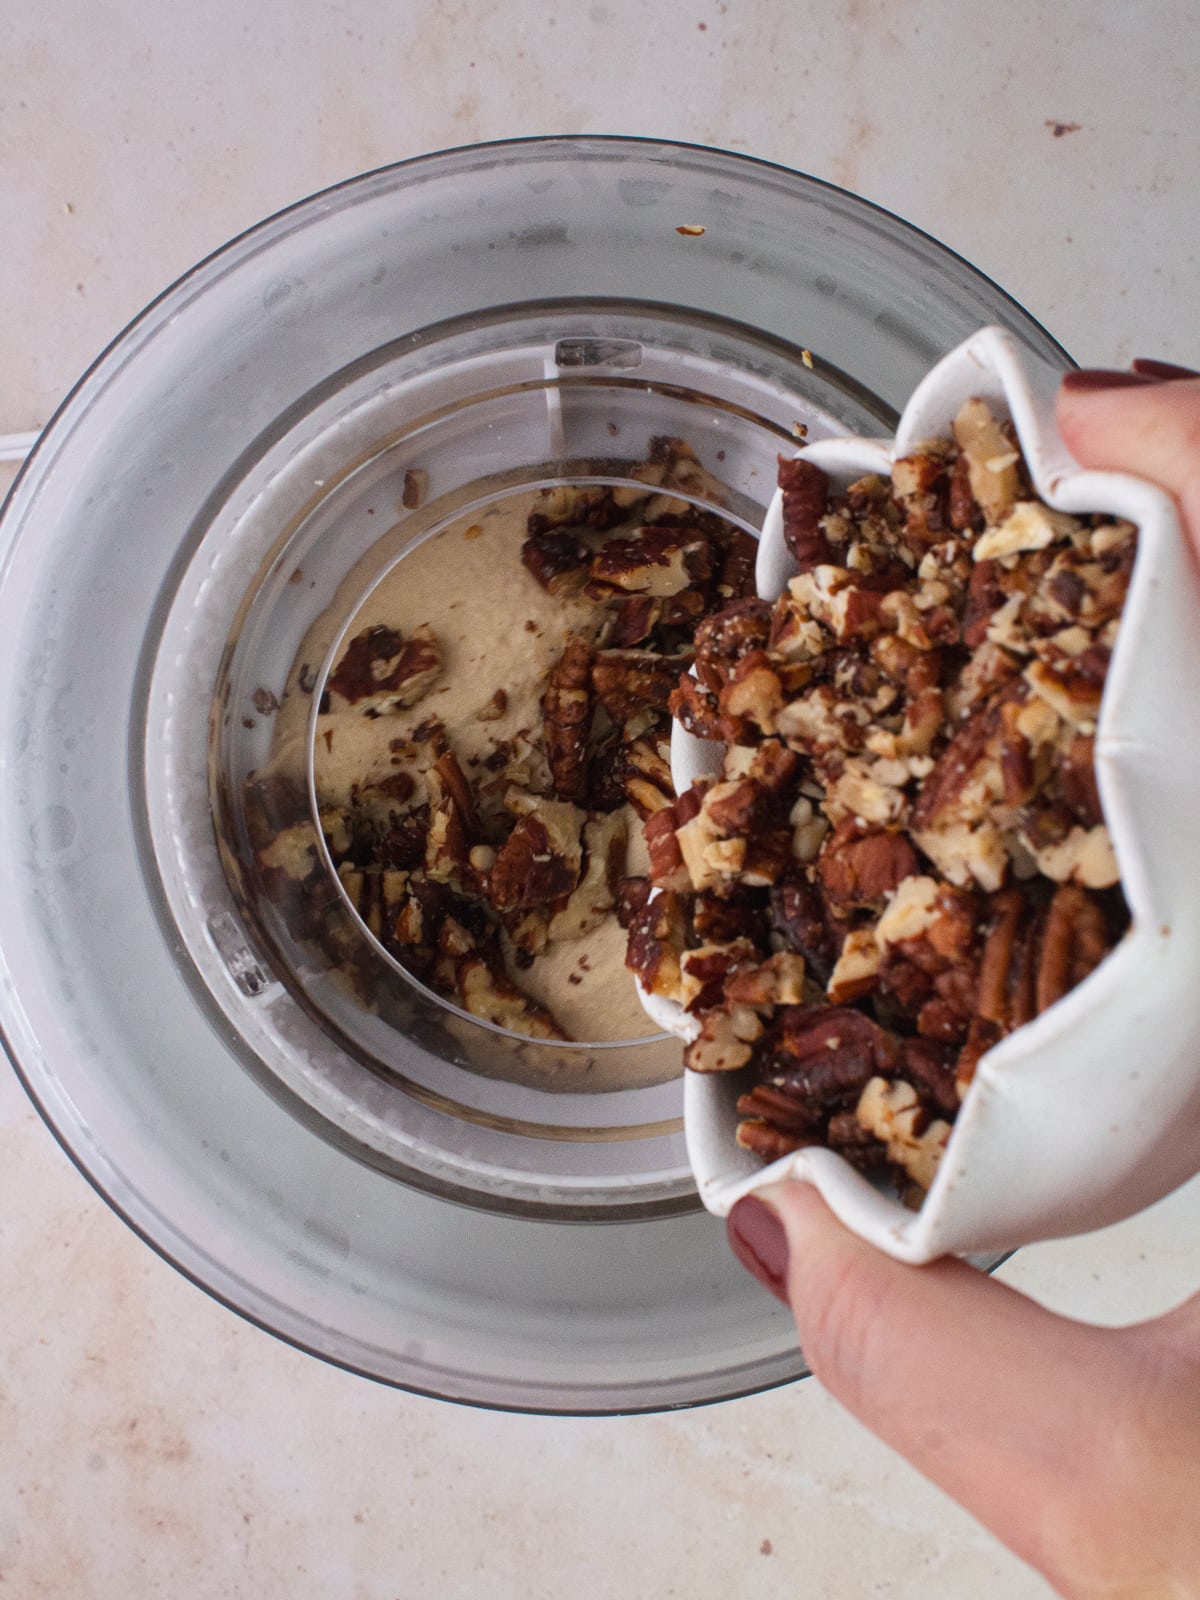 chopped pecans are added to churning ice cream